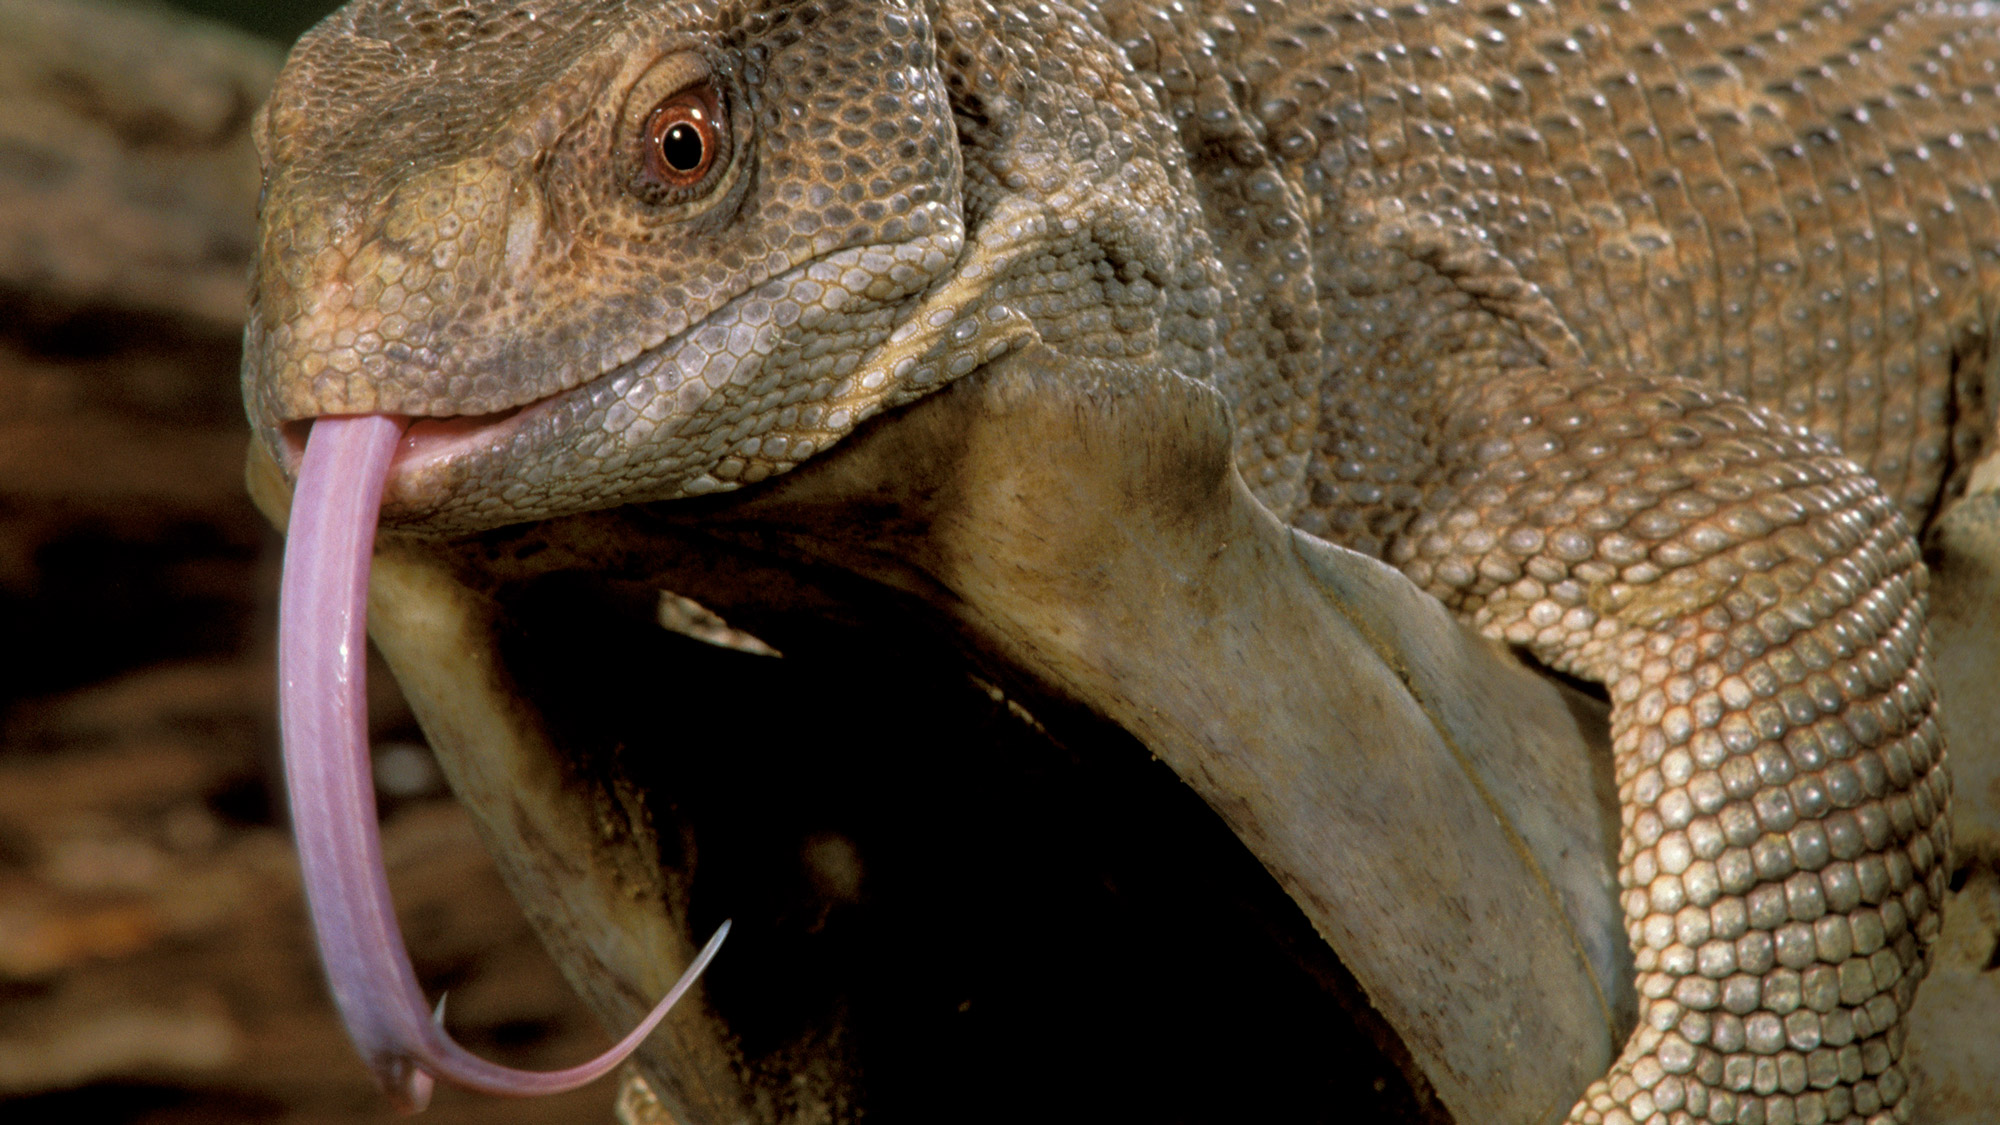 Why can reptiles hold their breath for so much longer than birds and mammals?